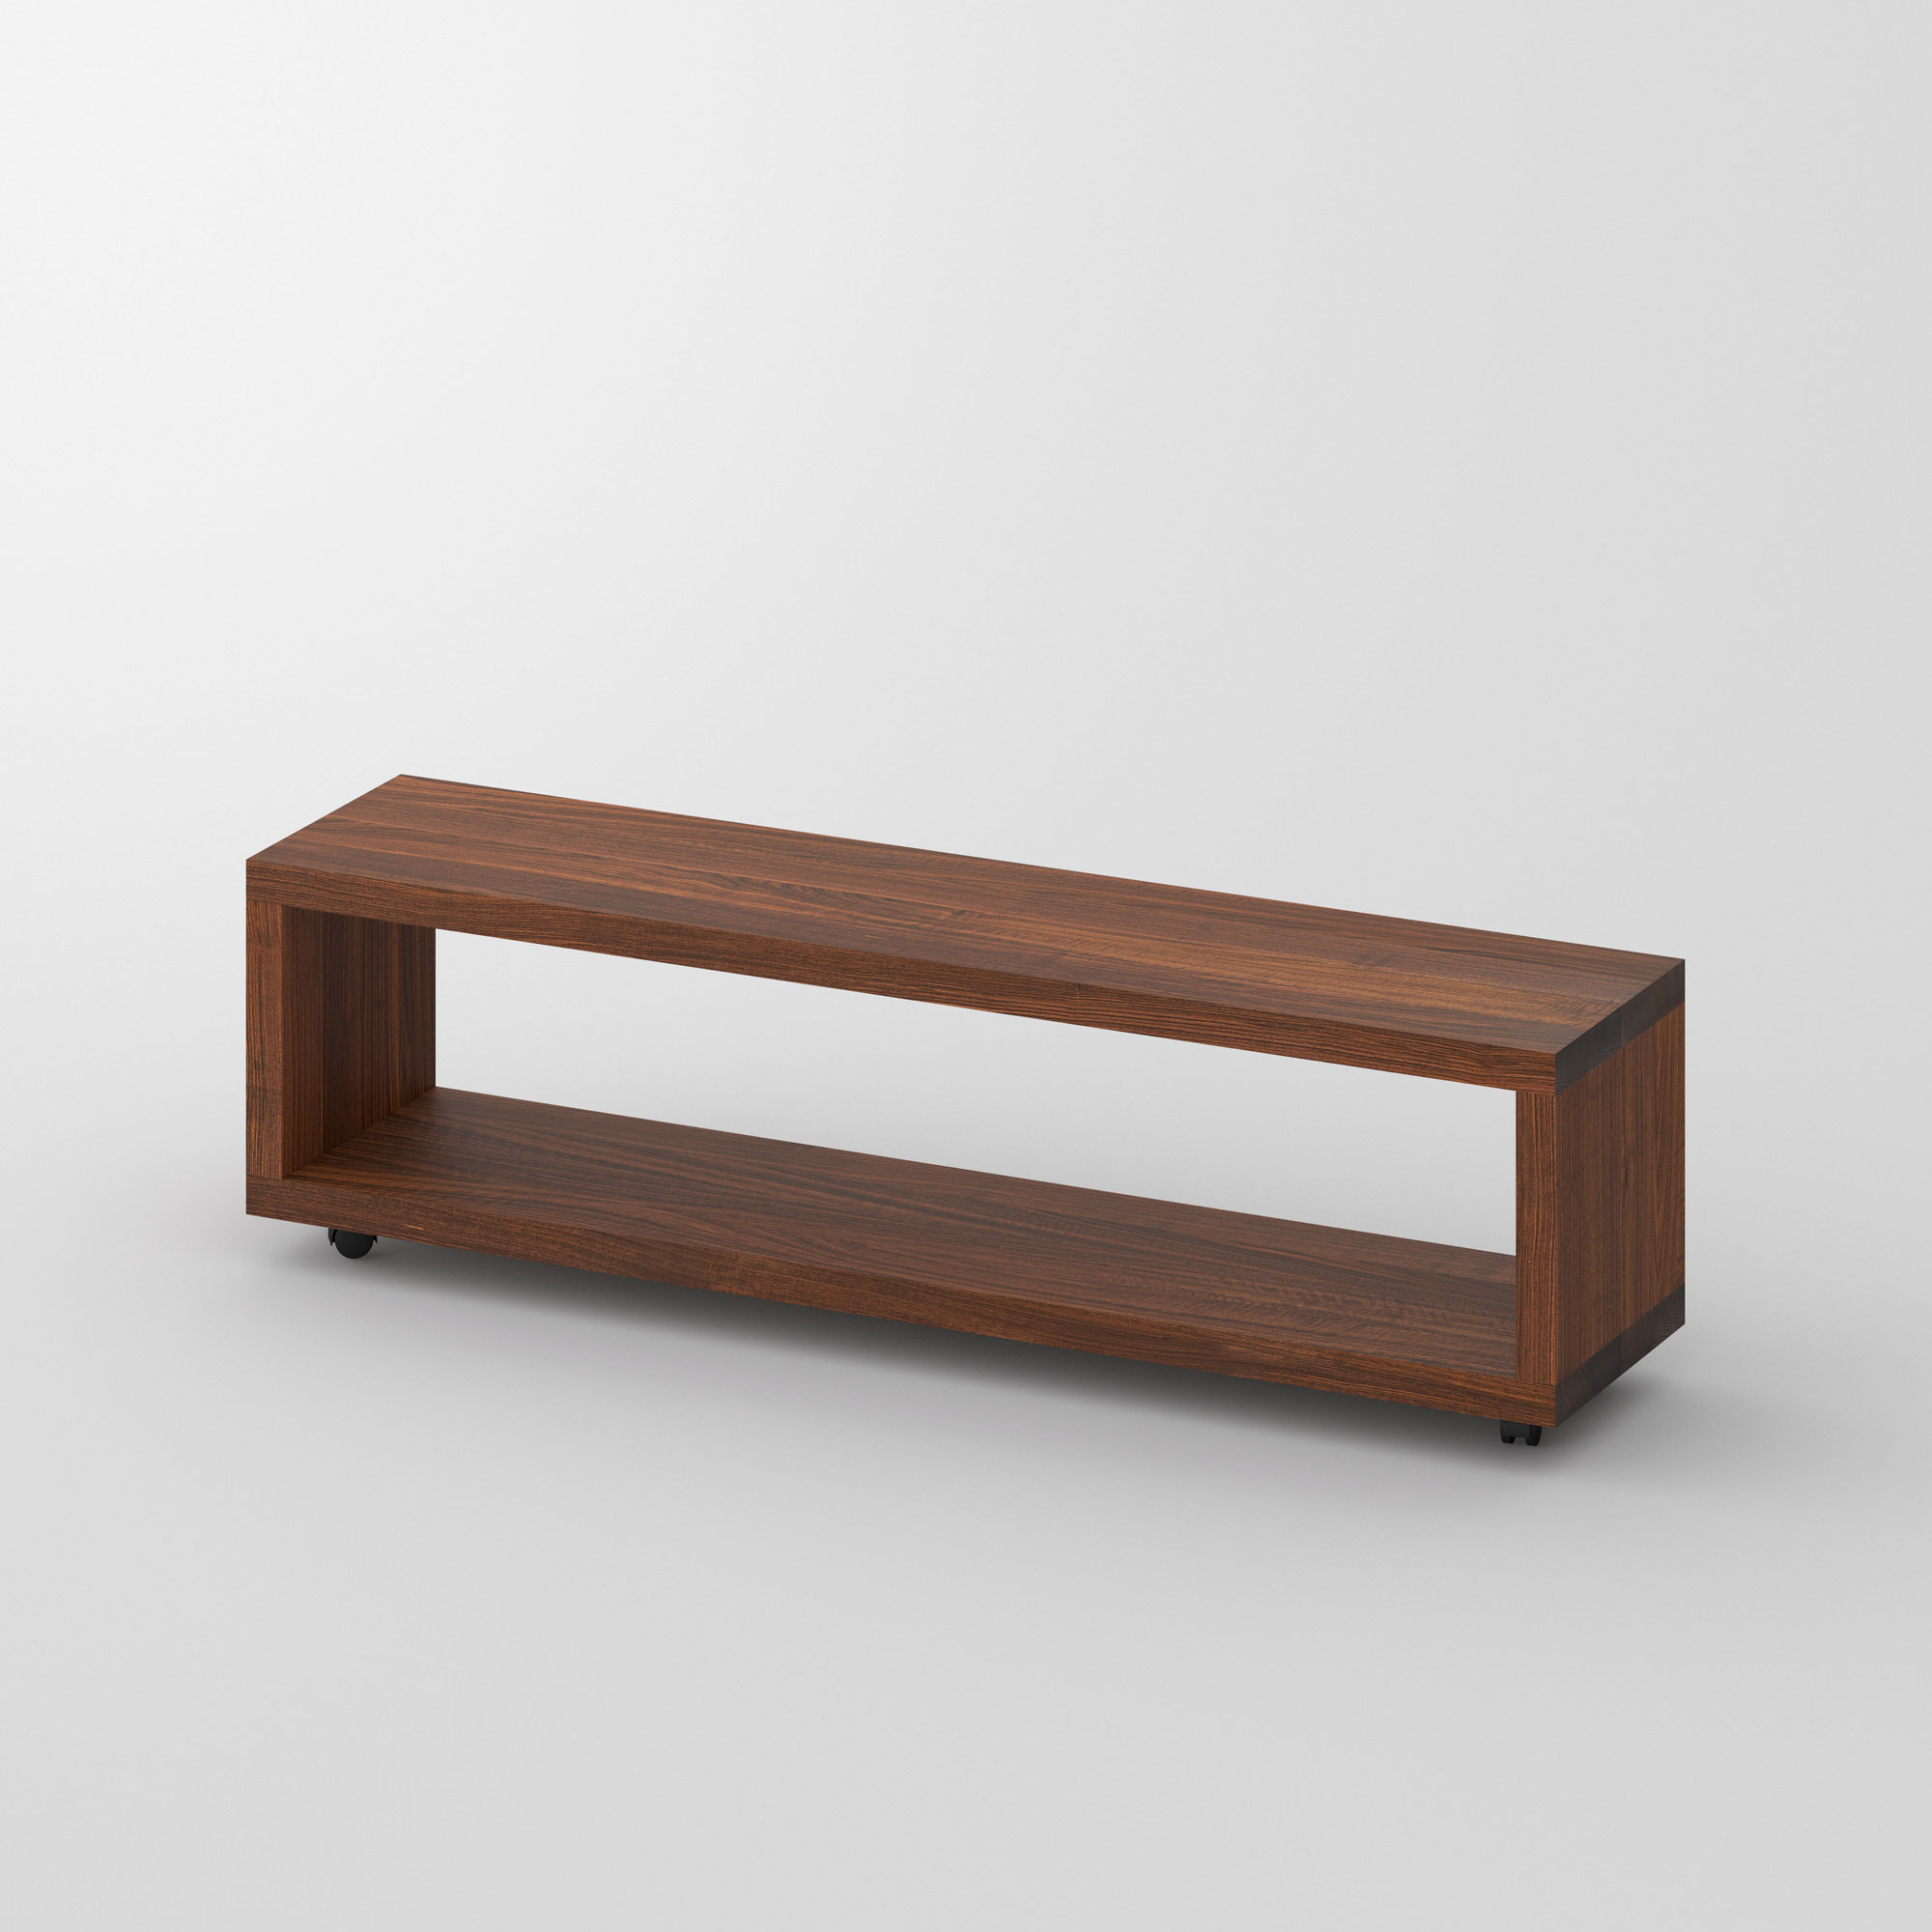 Rolling Night Table MENA-B-ROL cam1 custom made in solid wood by vitamin design